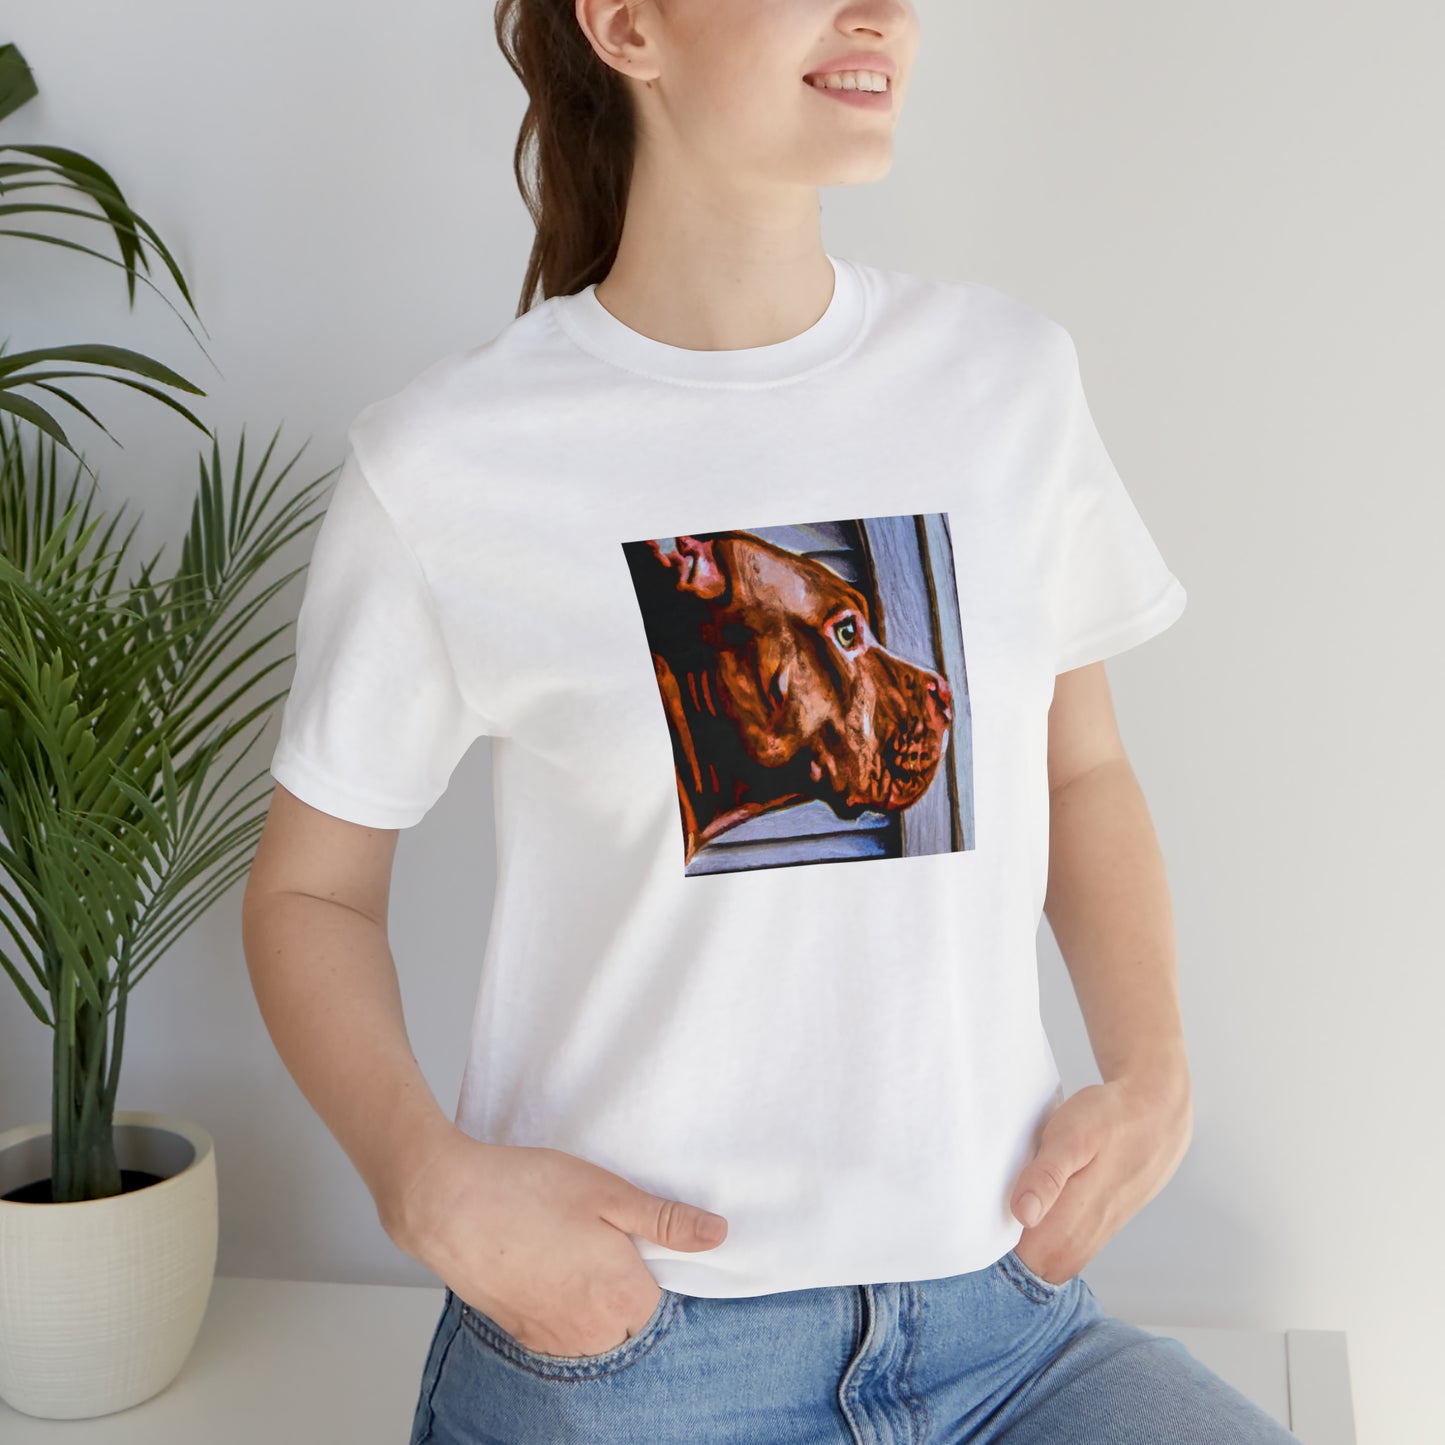 Fabiana Quadrelli is an Italian streetwear designer from the 1990s who made a name for herself creating bold and brightly-colored clothing for both men and women. She was known for putting her own modern spin on traditional Italian fashion,-Tee